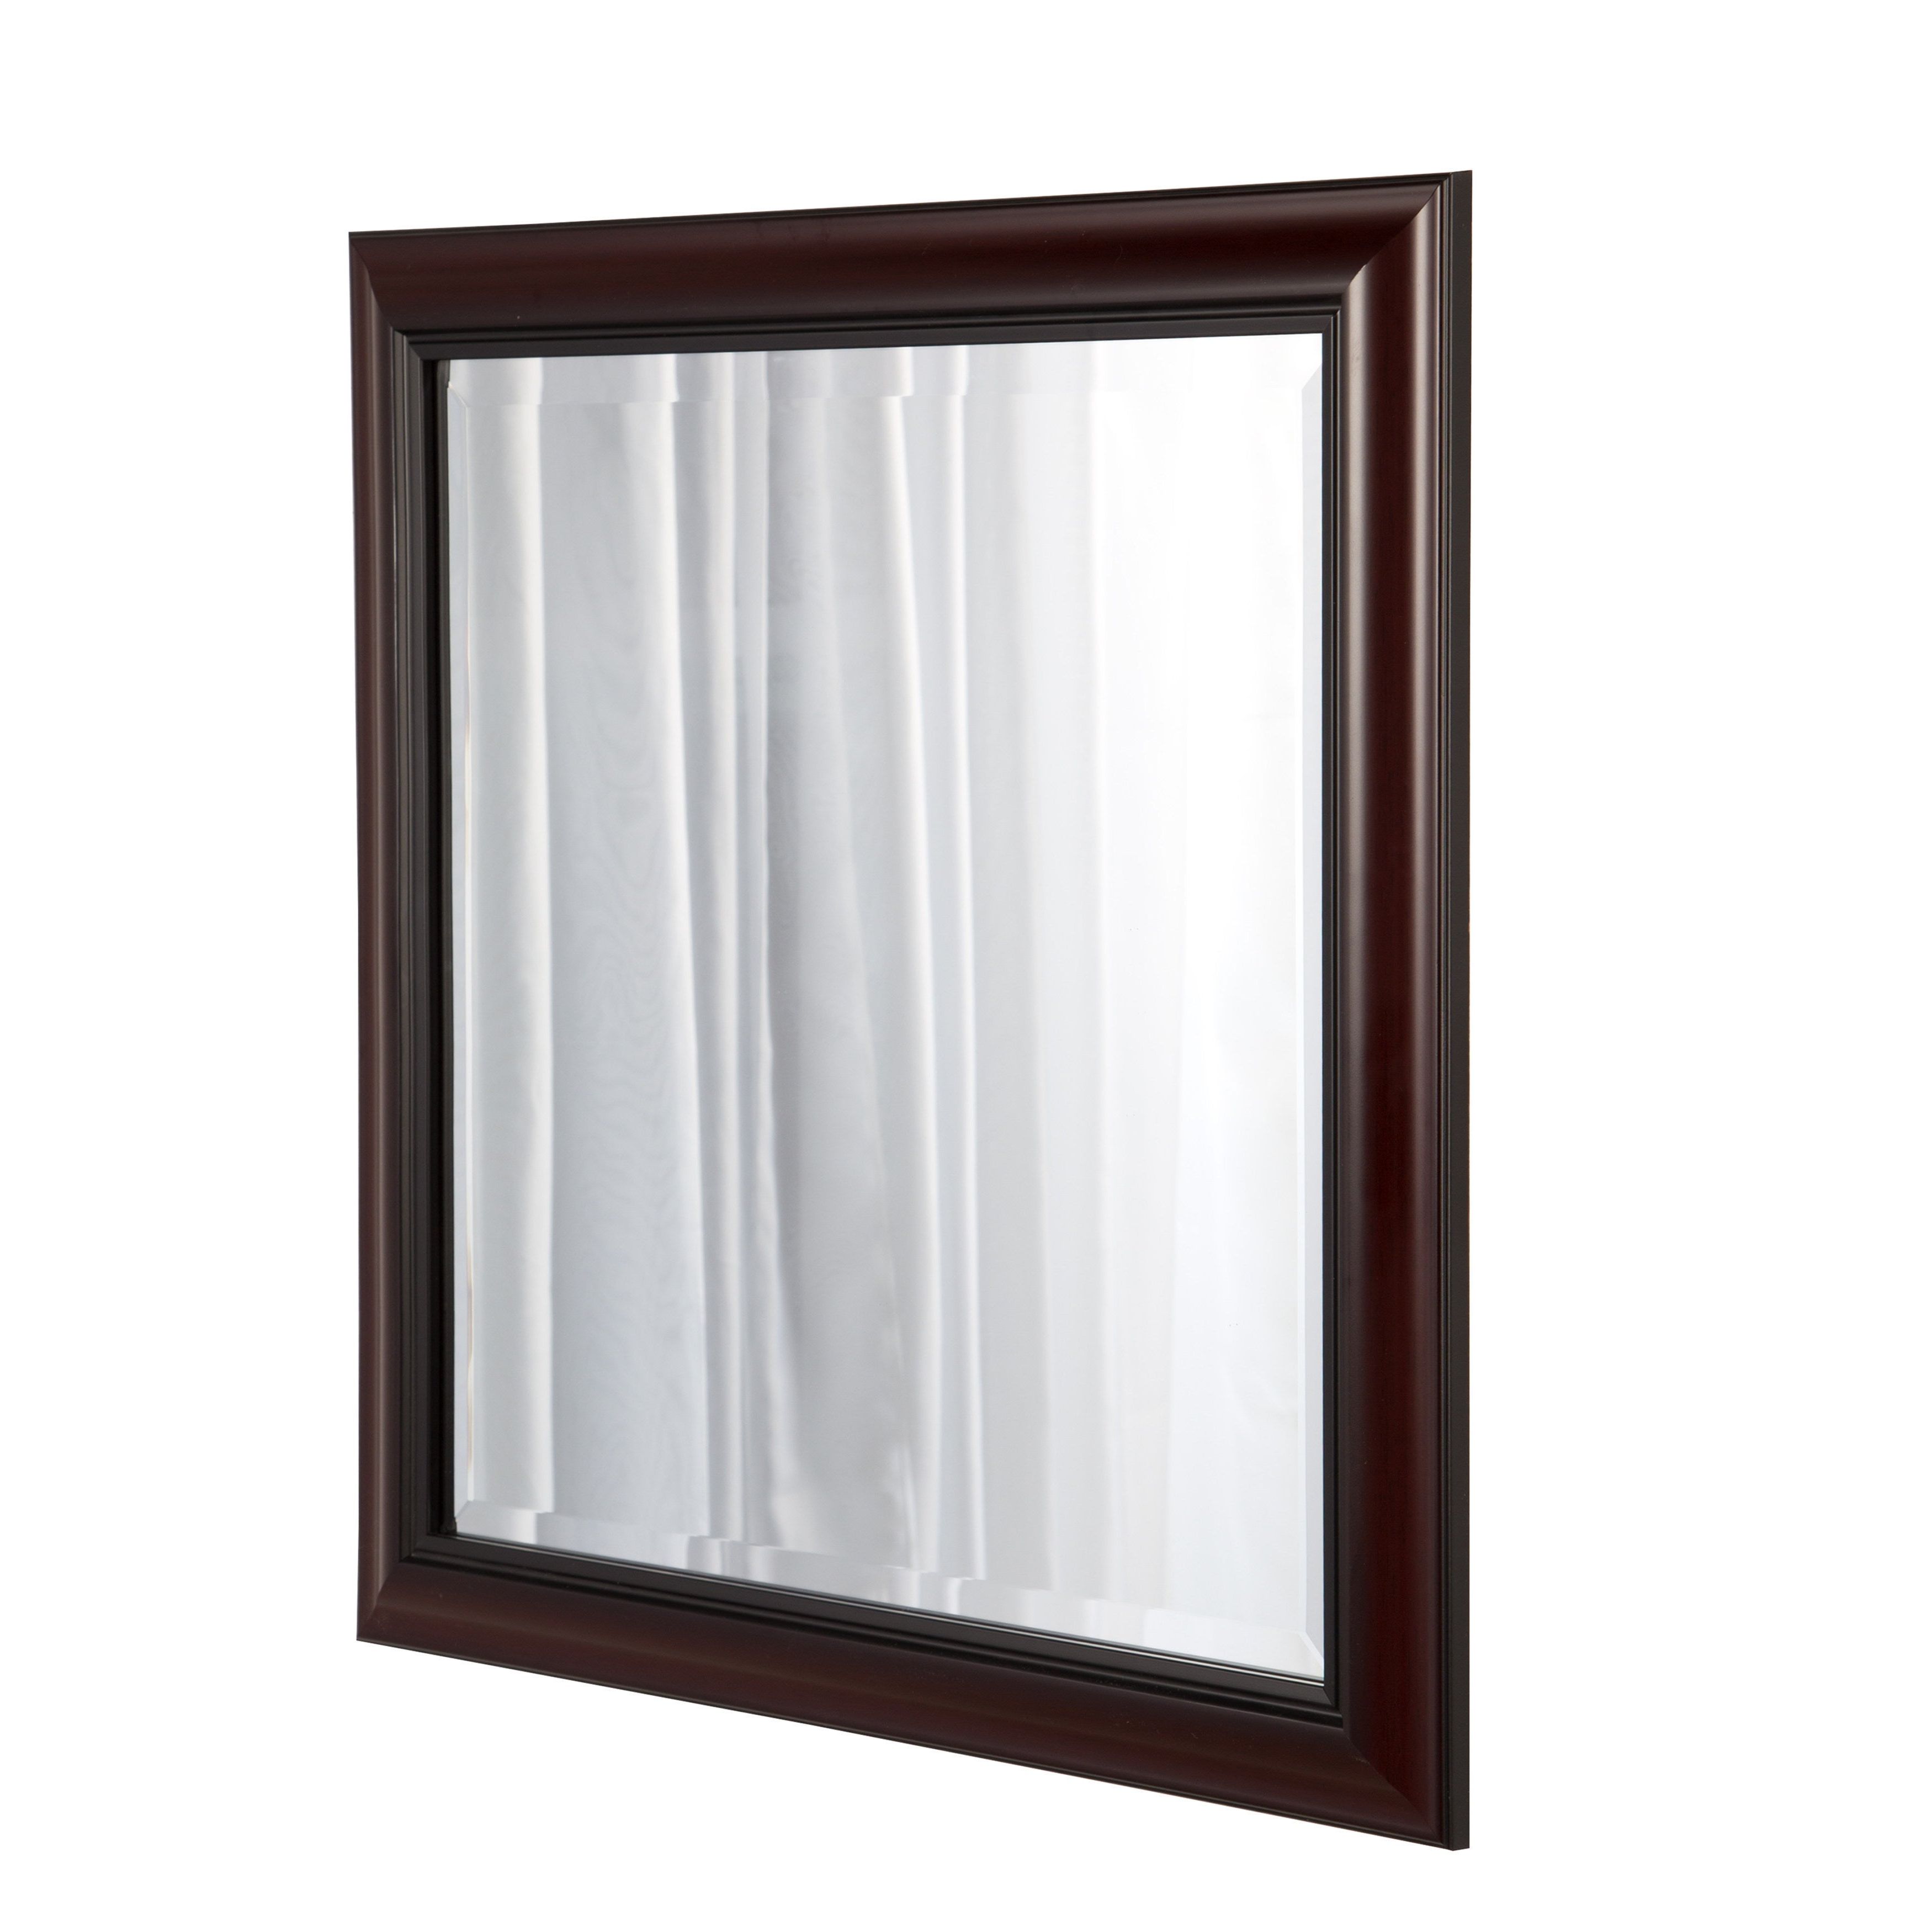 Designovation Dalat Cherry Framed Beveled Wall Mirror Within Popular Cherry Wood Framed Wall Mirrors (View 10 of 20)